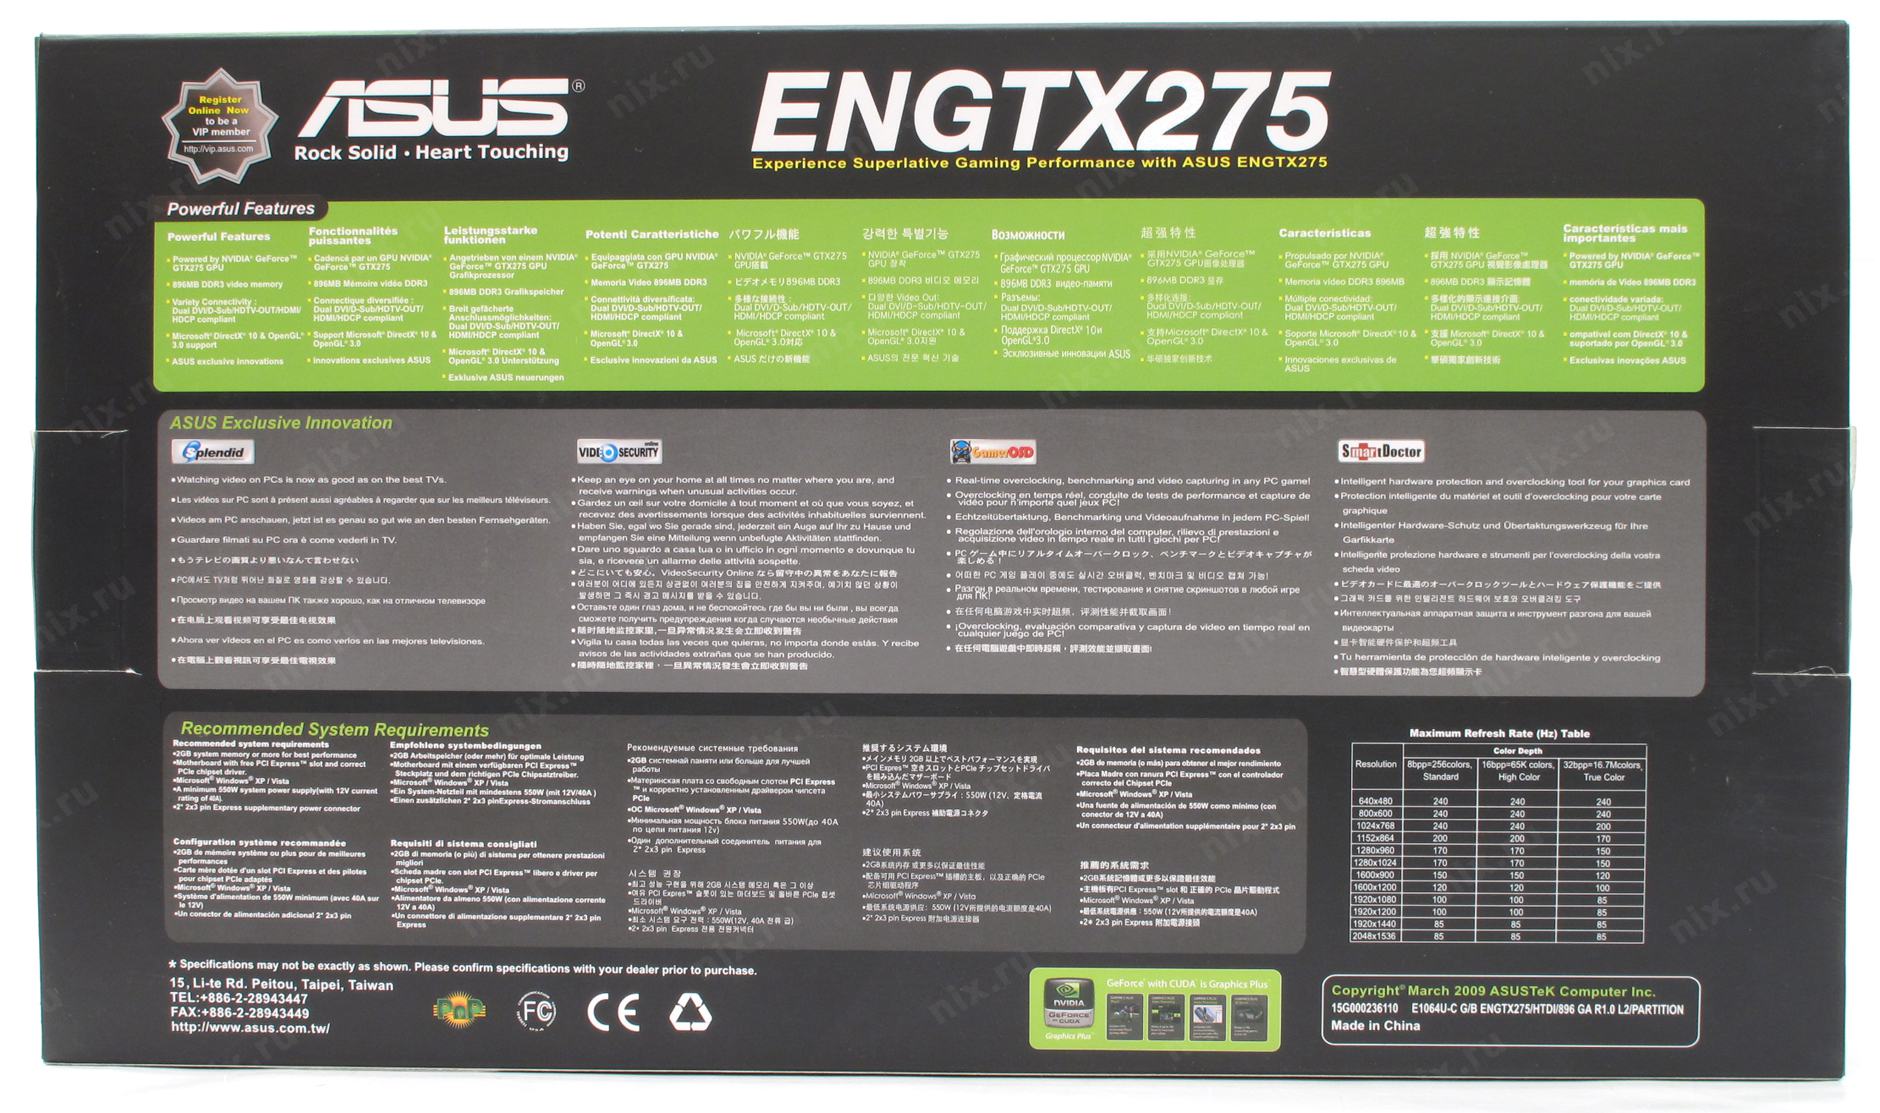 Power features. ASUS engtx275. ASUS Rock Solid Heart touching видеокарта. Инструкция на видеокарту ASUS engtx285. ASUS Rock Solid Heart touching видеокарта описание.